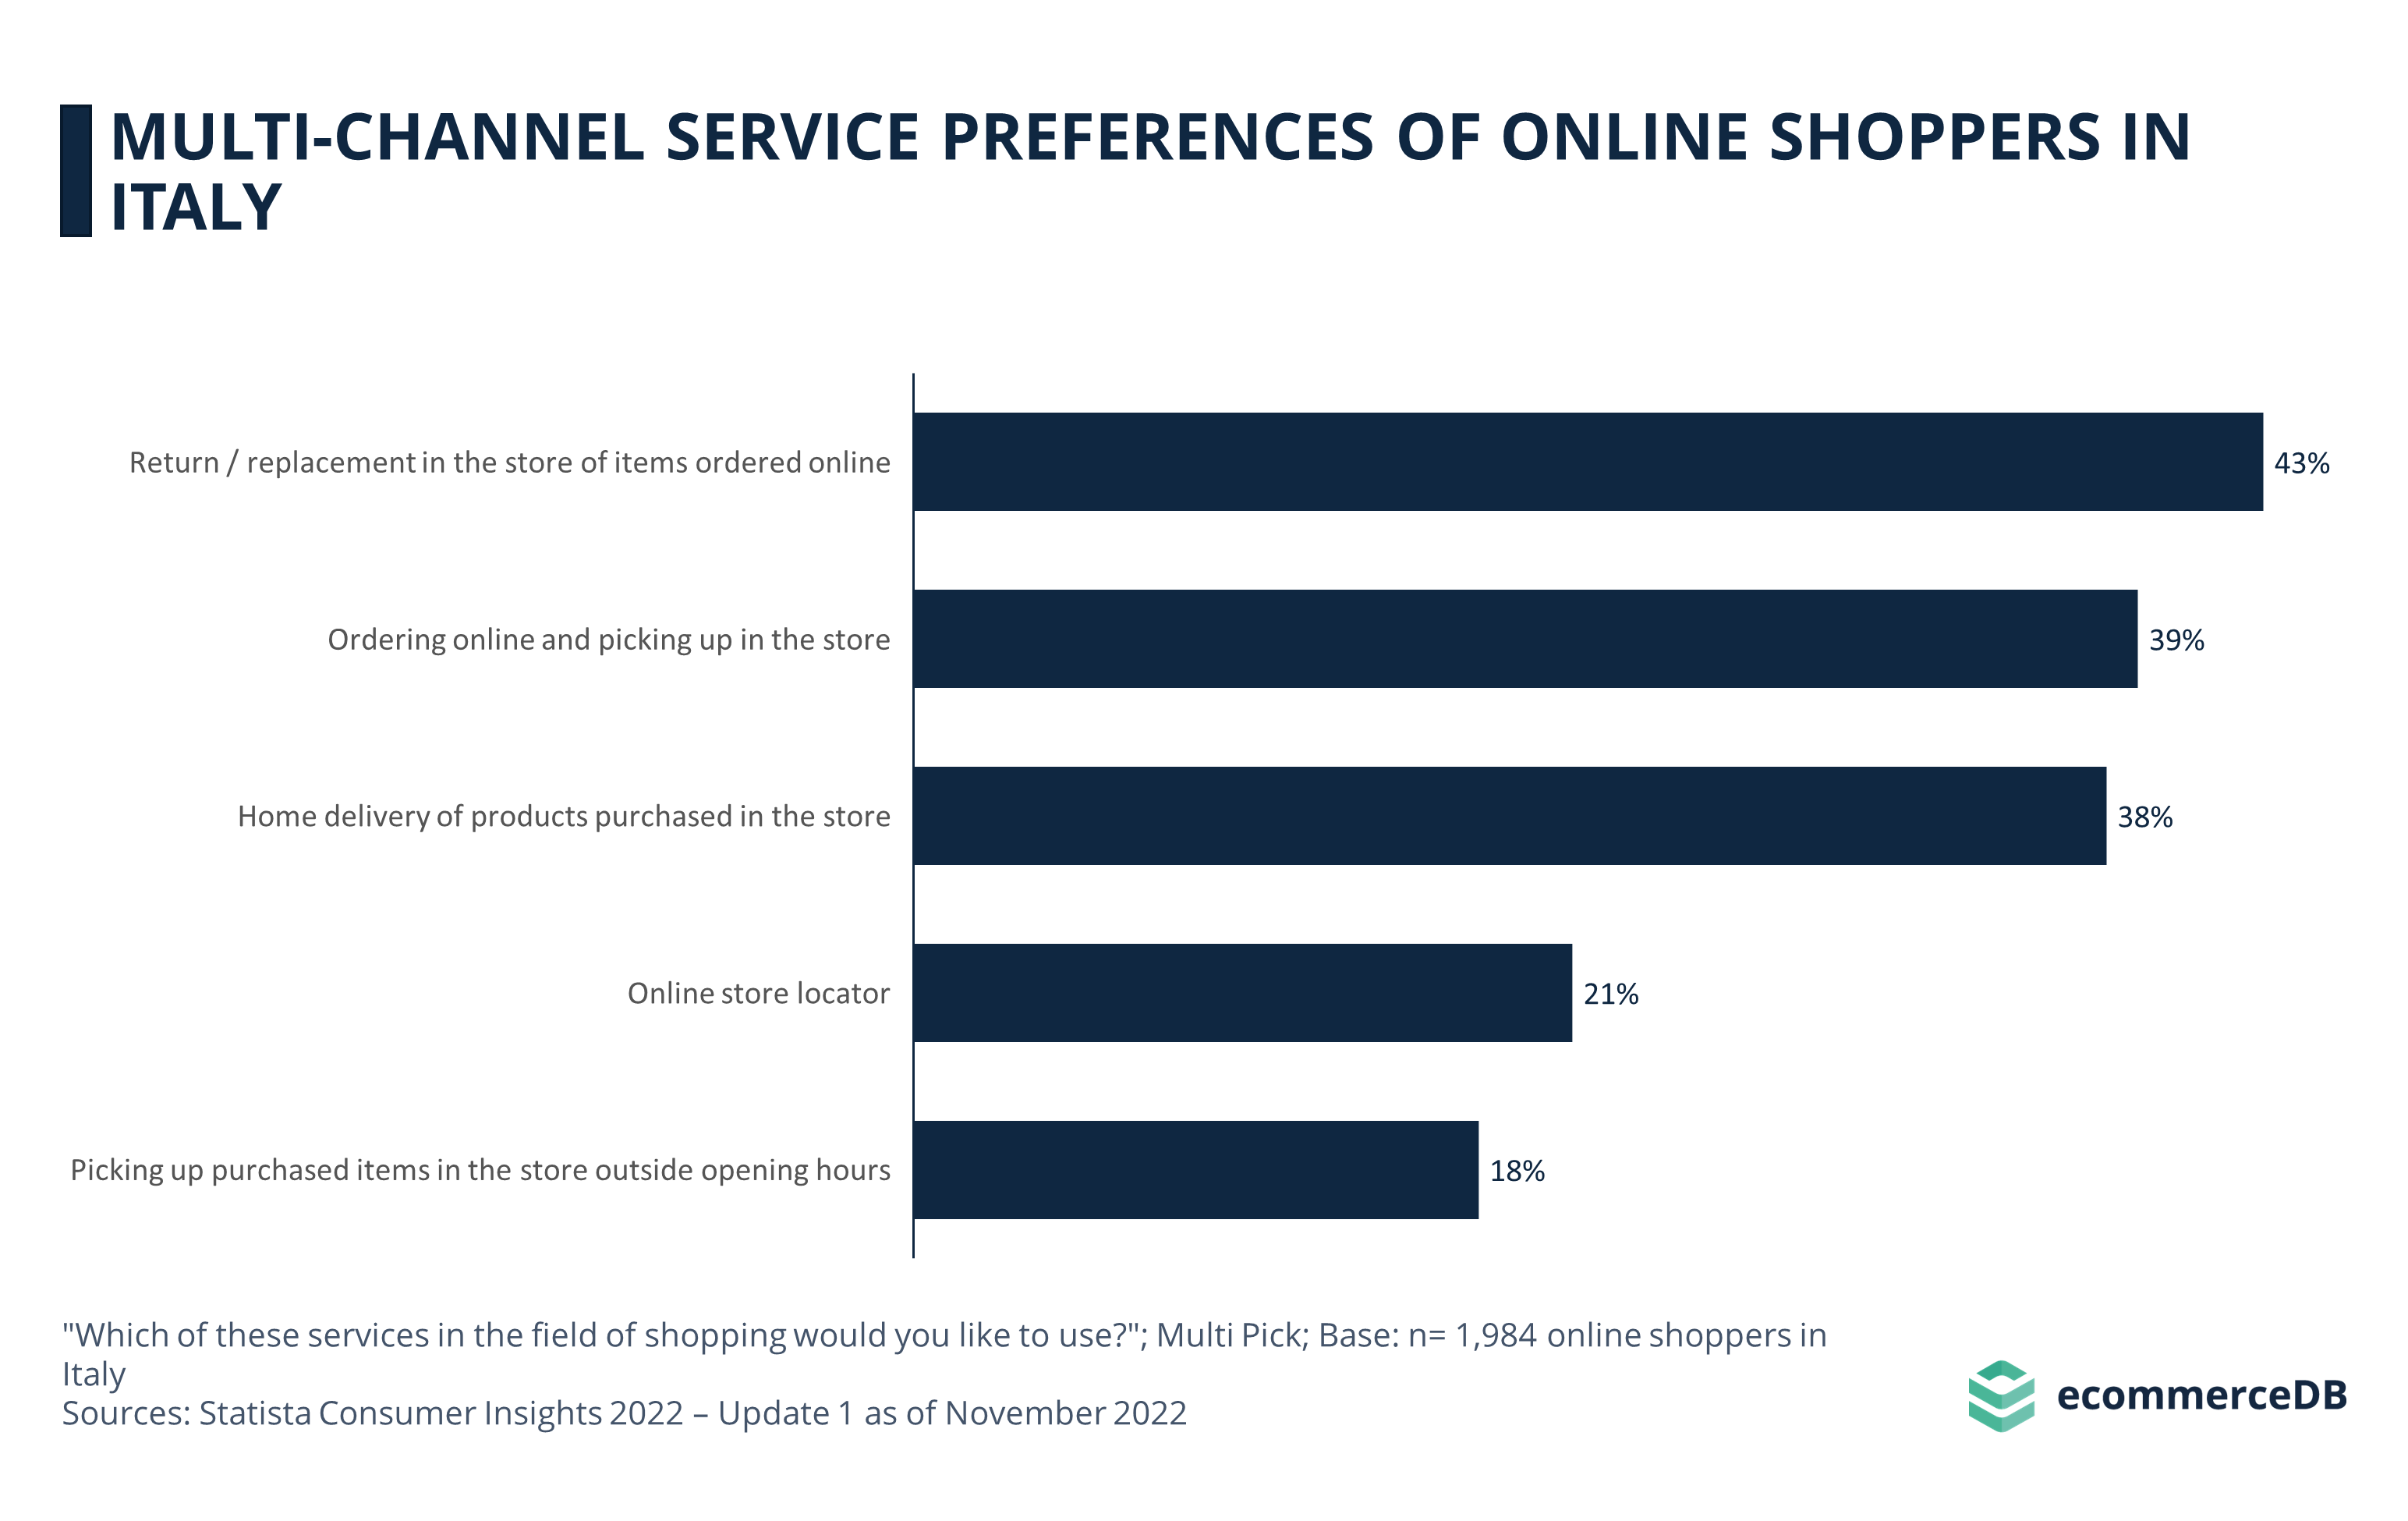 Multi-Channel Service Preferences of Online Shoppers in Italy